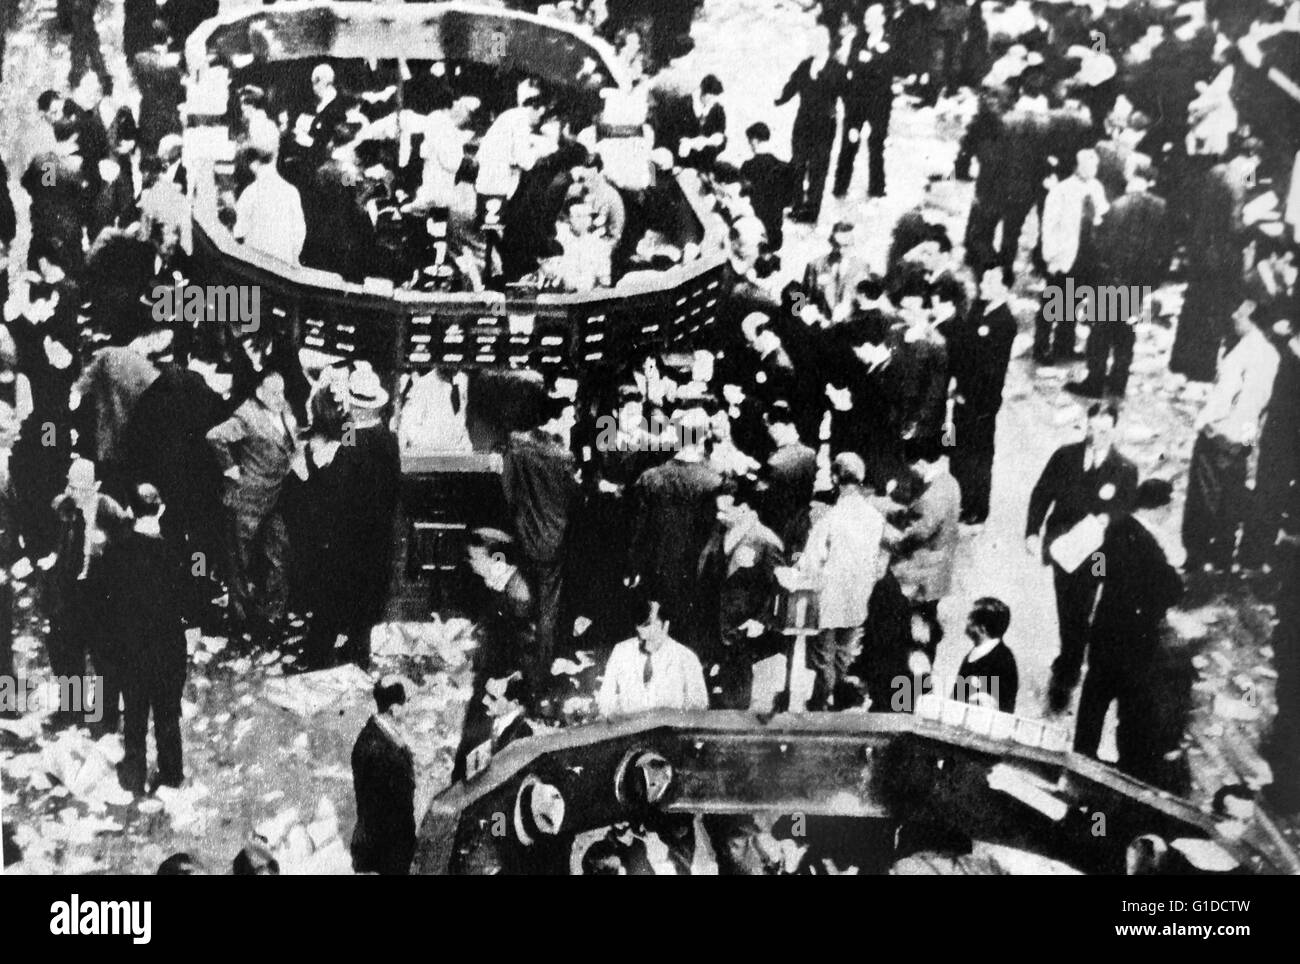 Photographic print of crowds of the floor of the Stock Exchange on Wall Street, New York, at the onset of Wall Street Crash 1929. Dated 20th Century Stock Photo